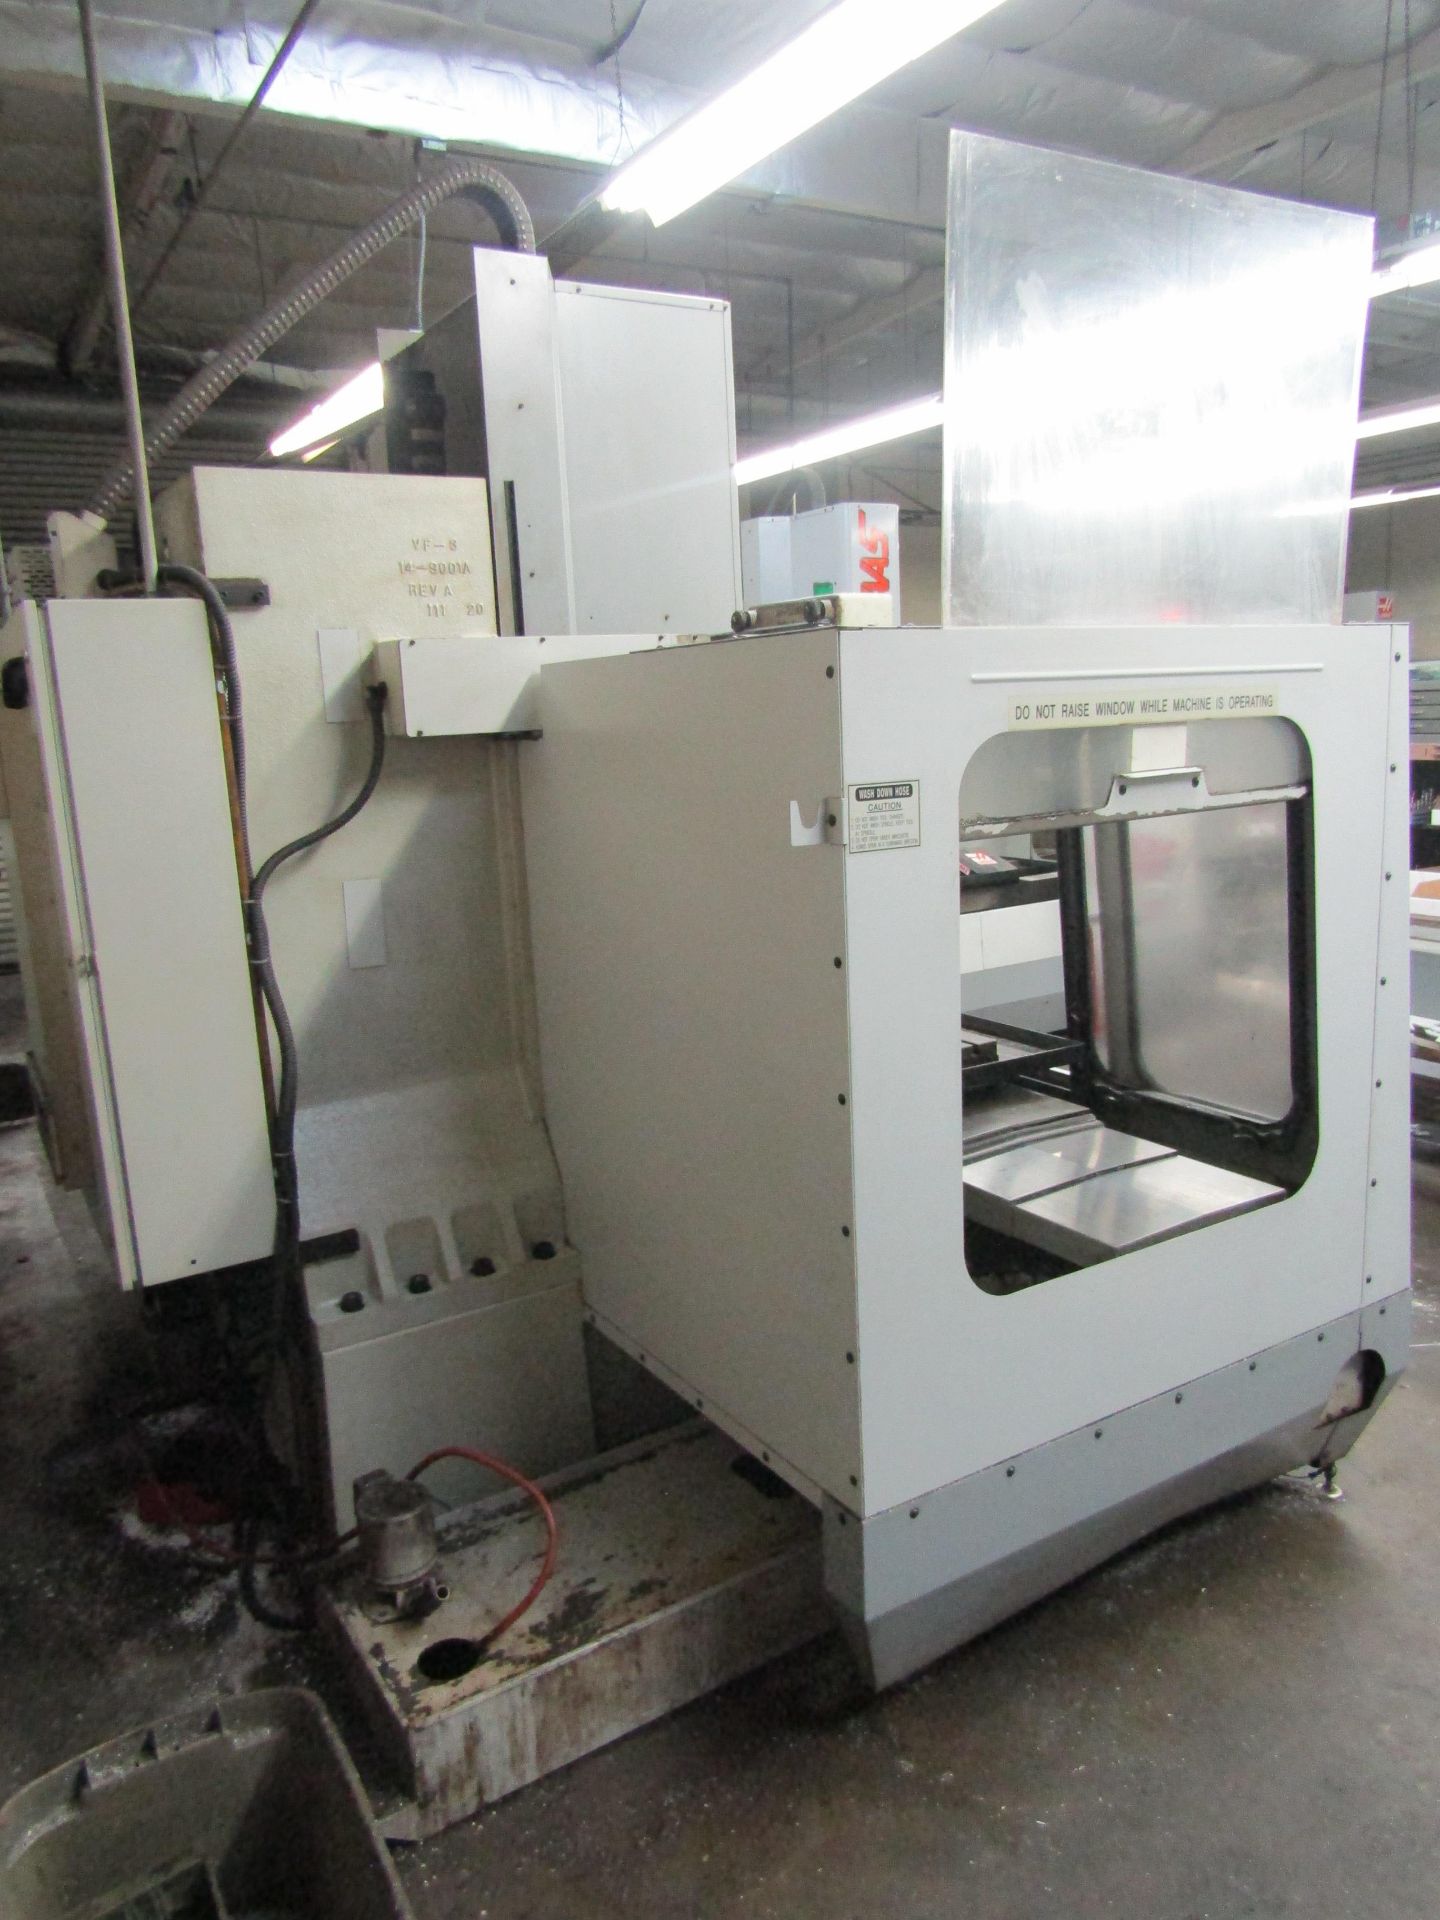 1995 HAAS VF-3 VERTICAL MACHINING CENTER, TRAVELS: 30 X 20 X 20, 21 ATC, HAAS CONTROL – SERIAL#: - Image 8 of 11